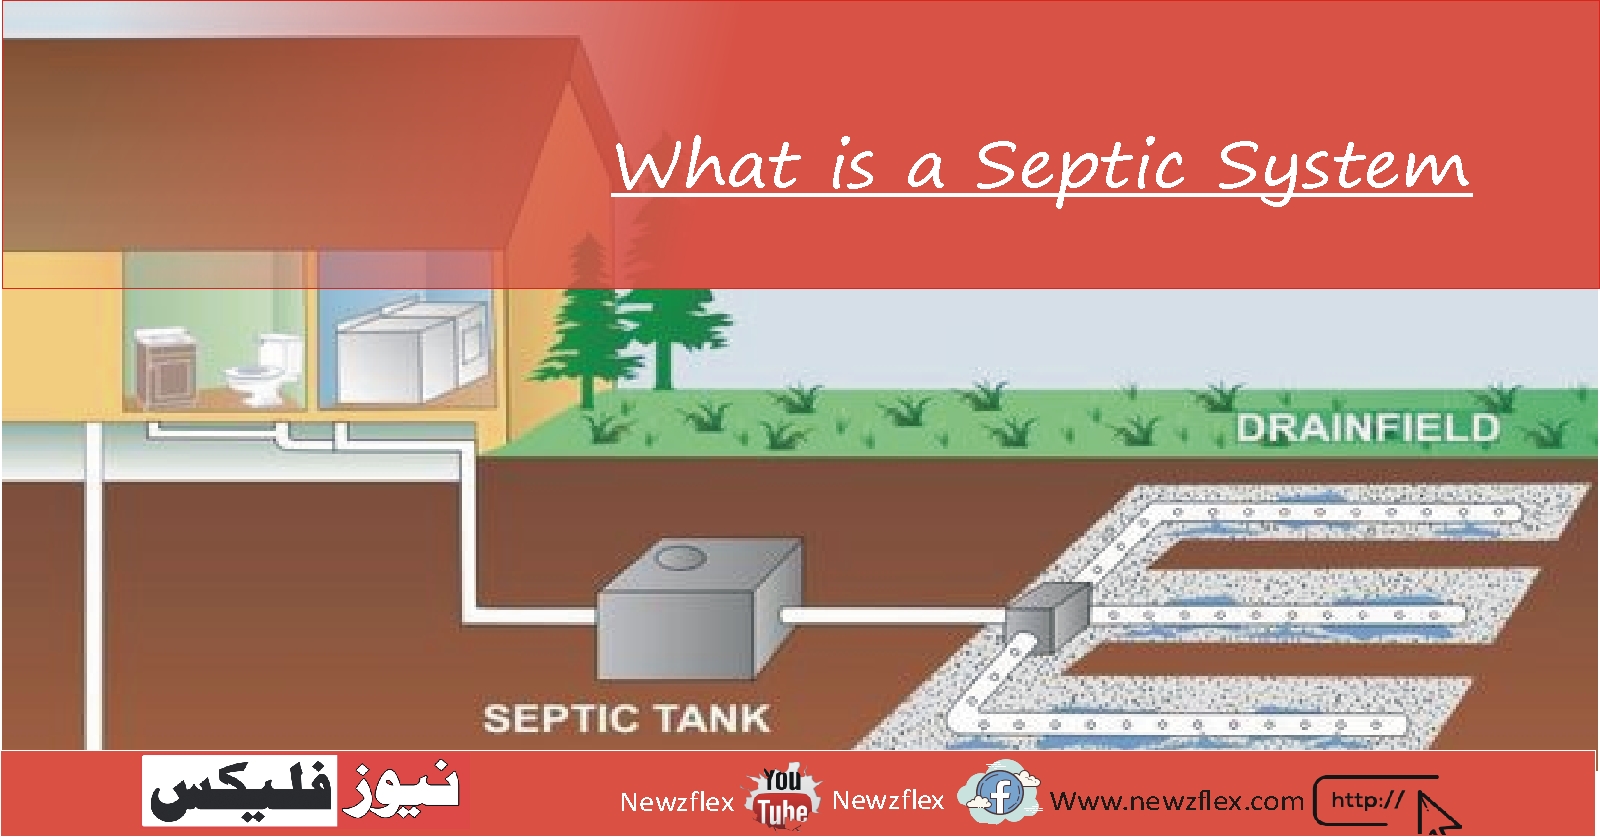 What is a Septic System